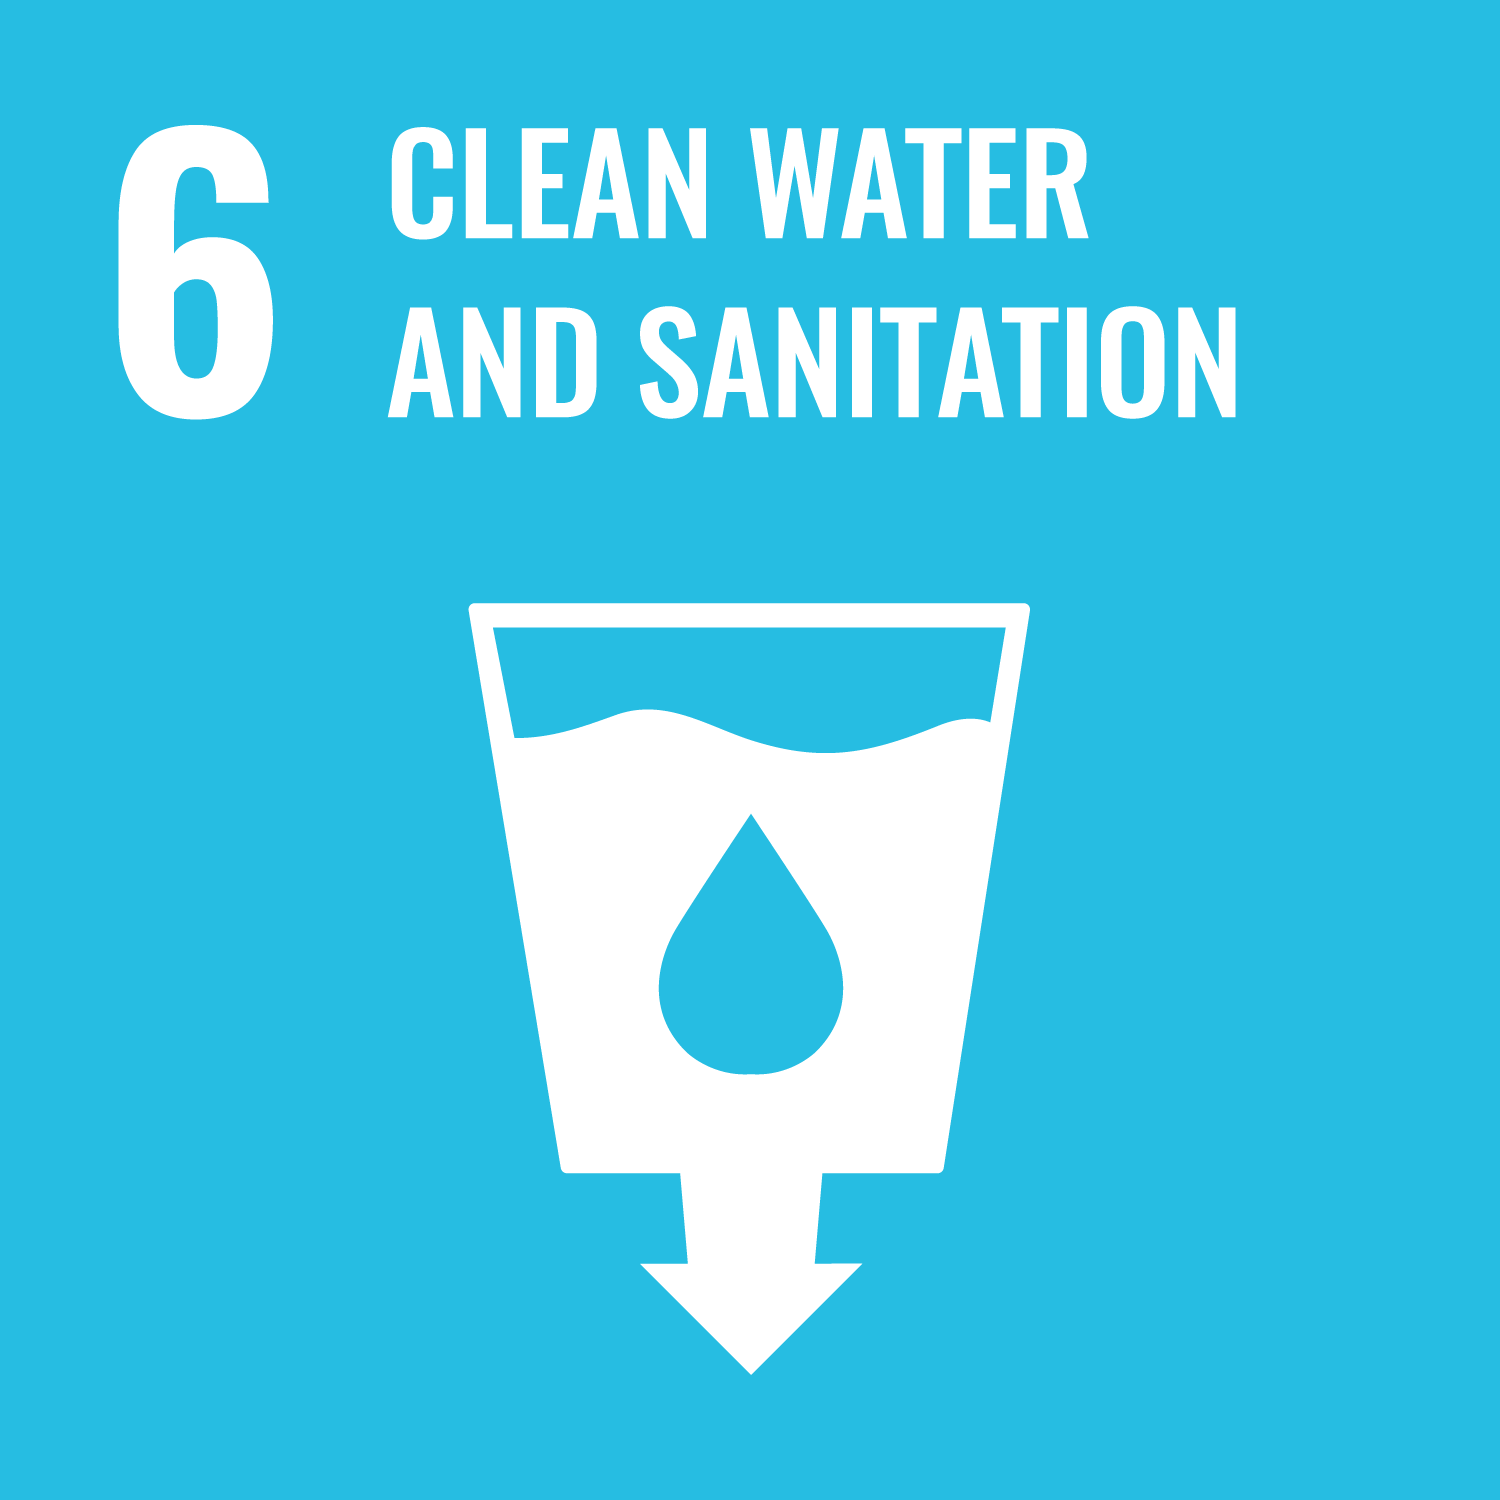 Sustainable Impact - Clean Water and Sanitation